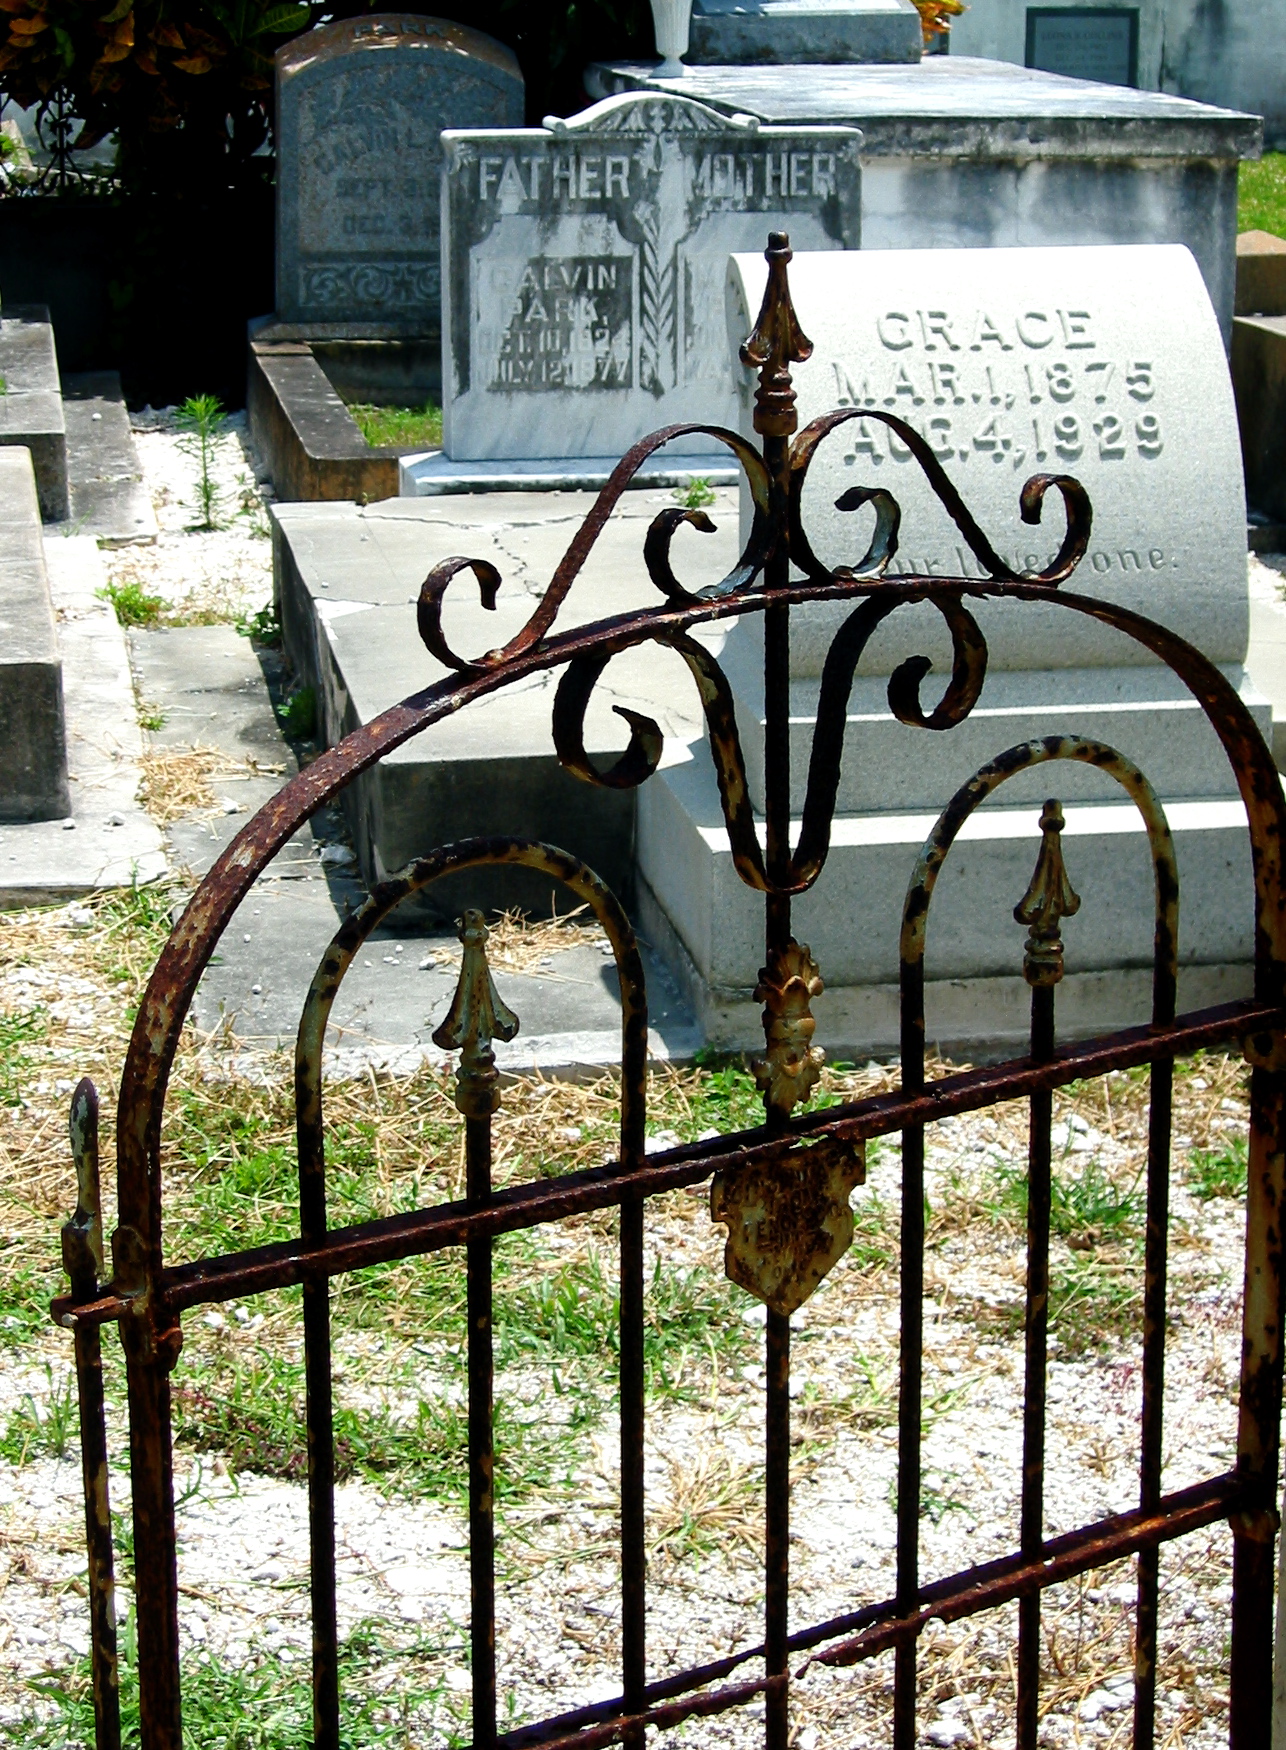 there is a metal gate next to the headstones